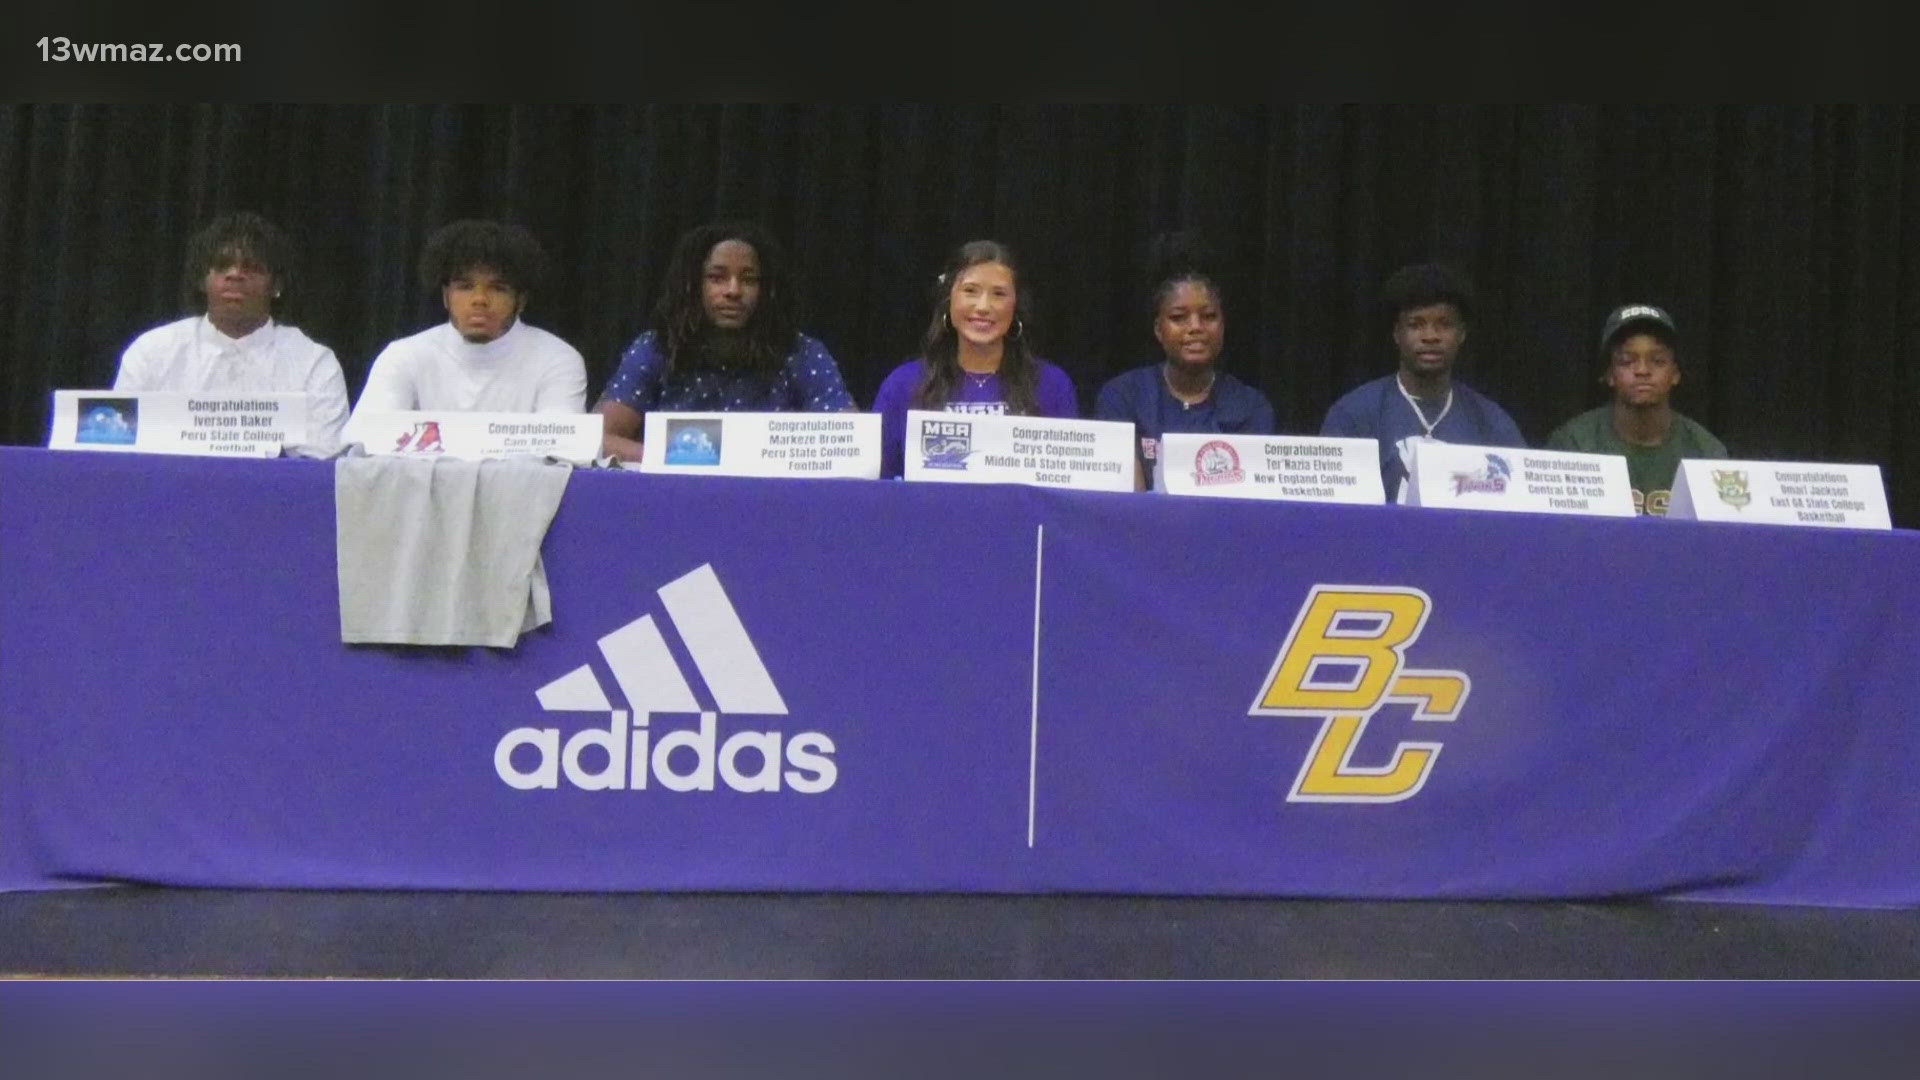 Check out where these talented students are heading to continue their athletic journey.